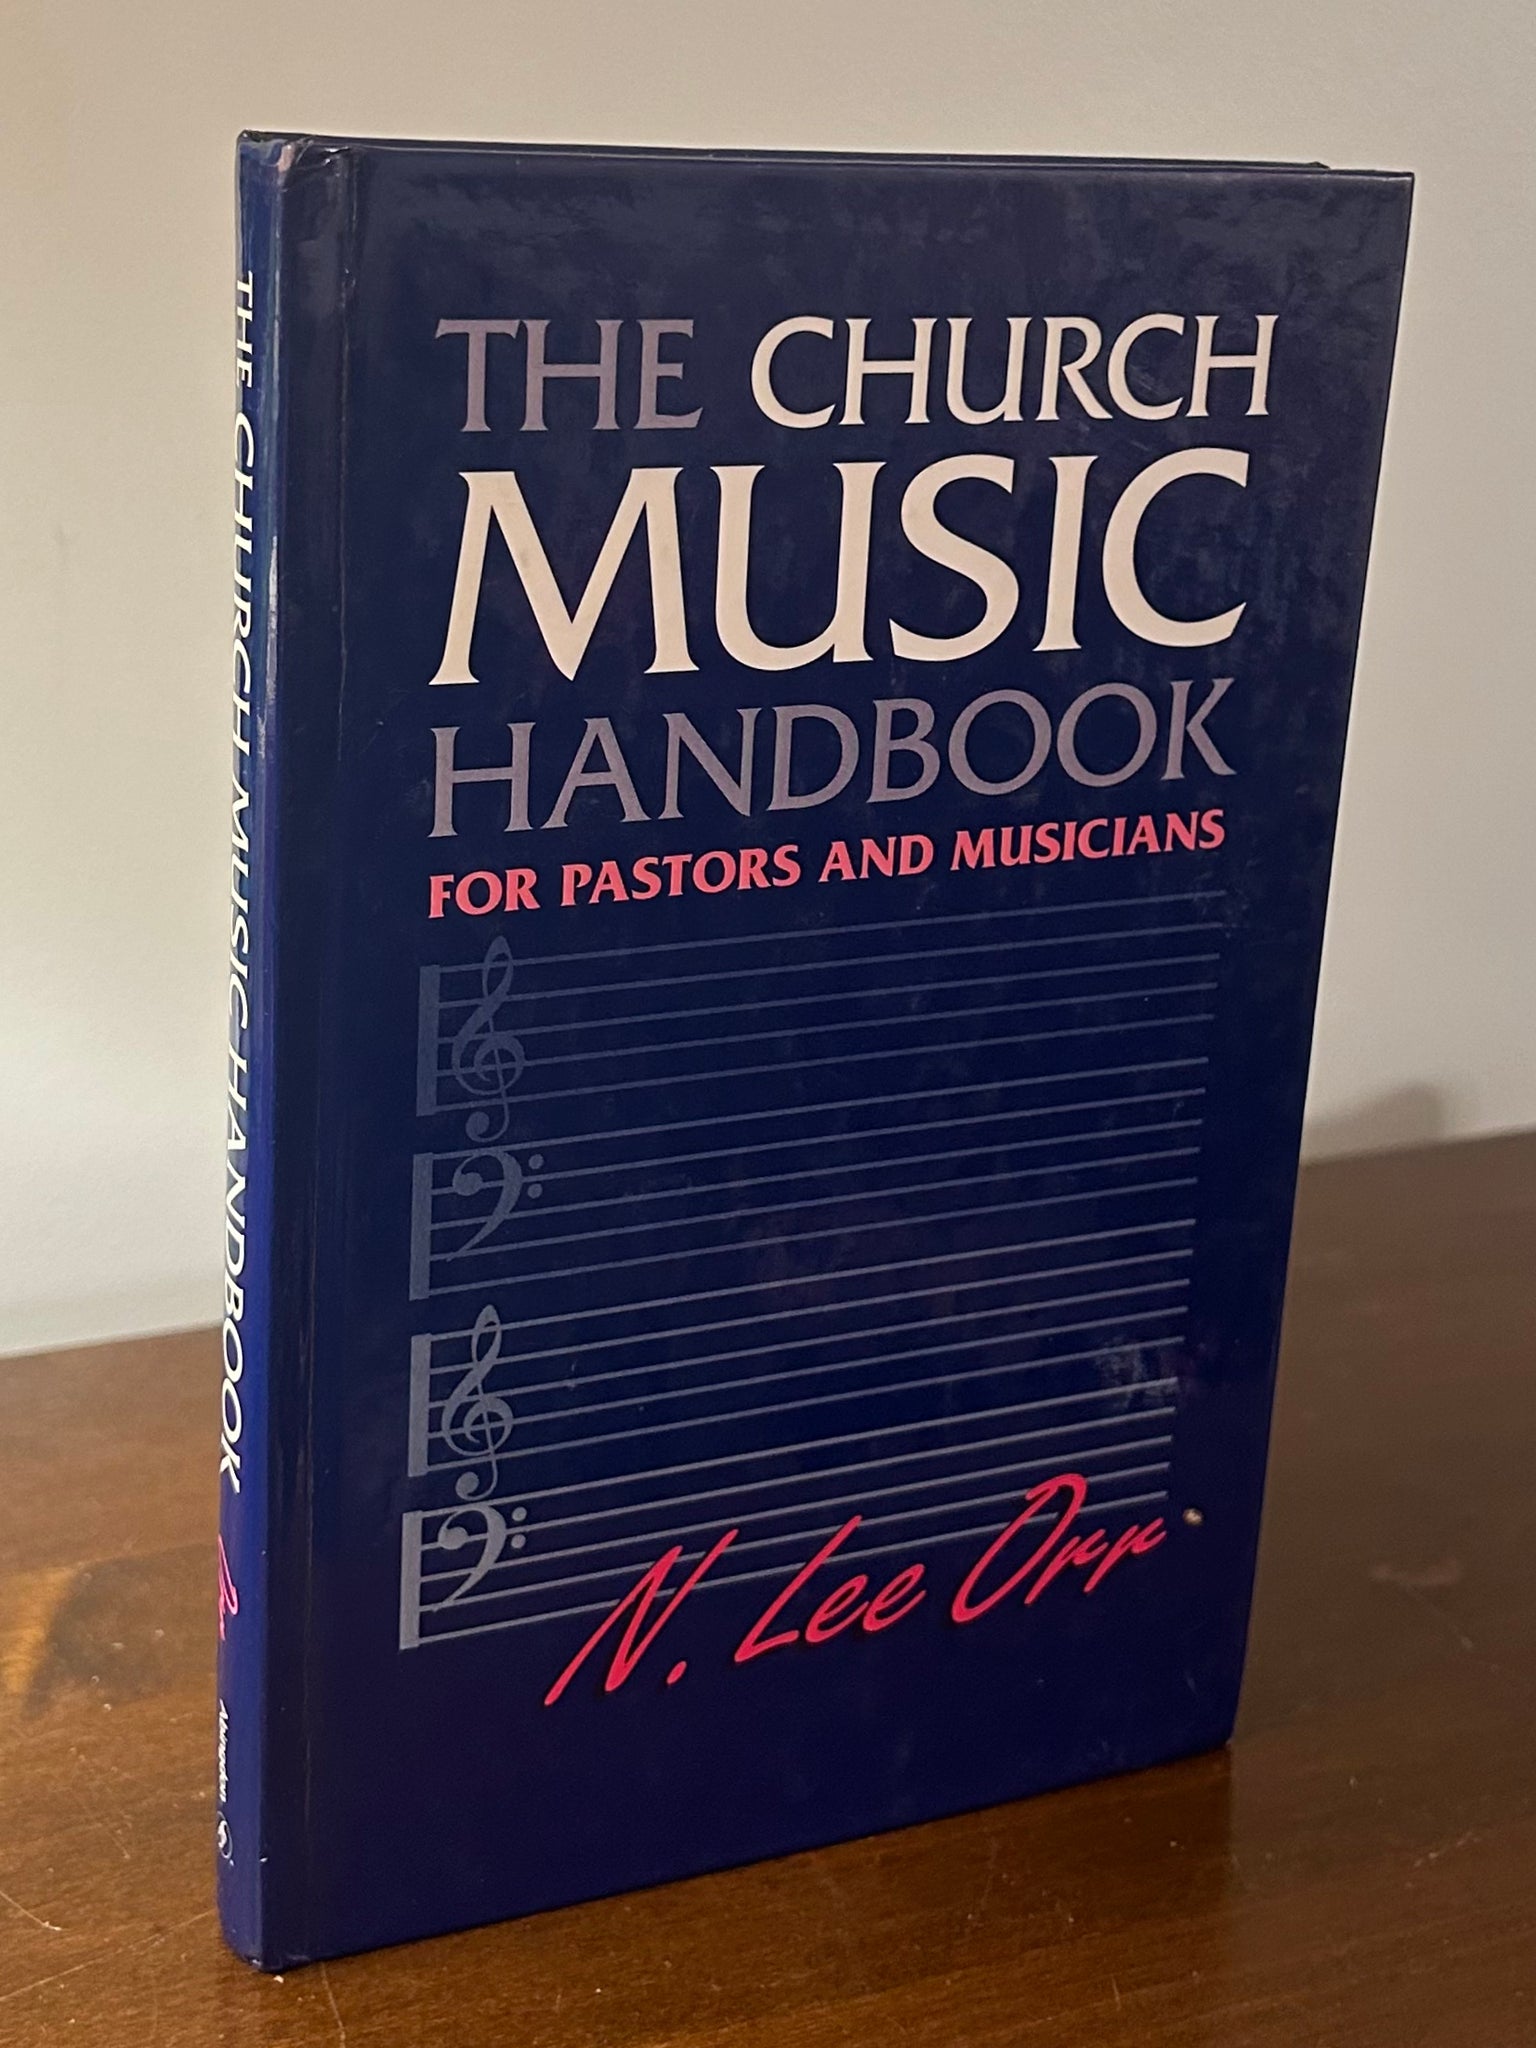 The Church Music Handbook for Pastors and Musicians